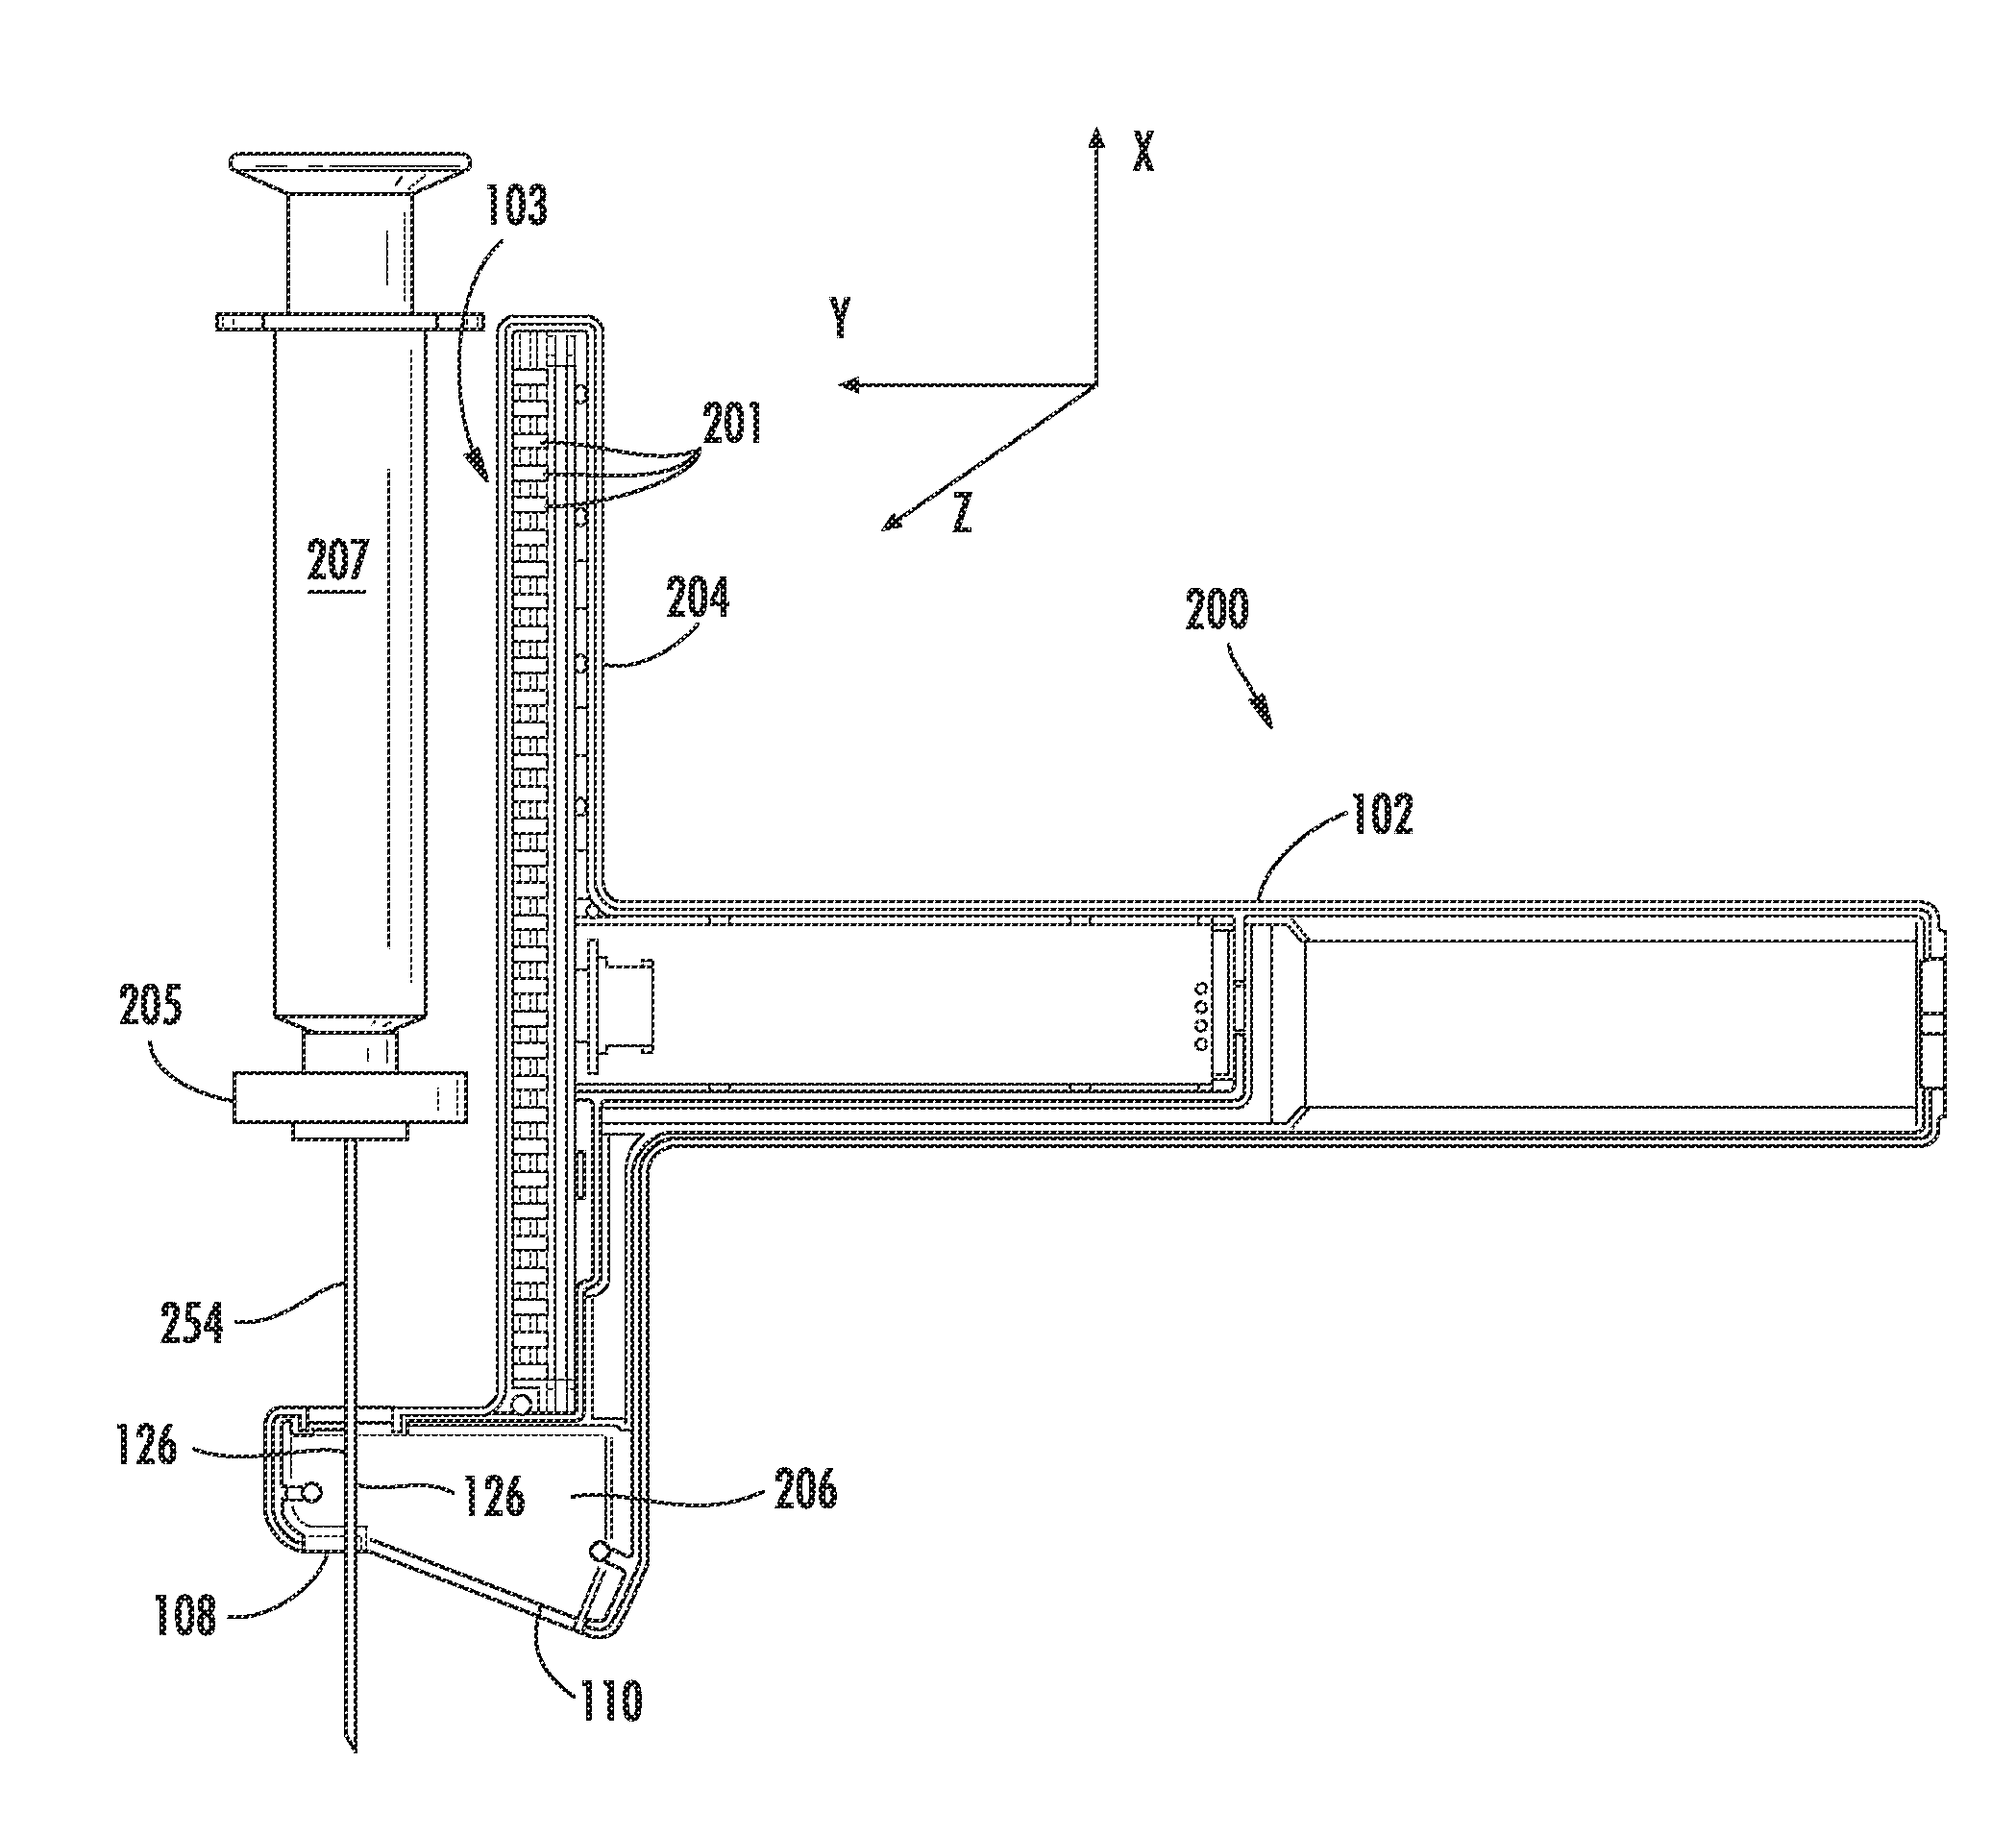 Probe and system for use with an ultrasound device